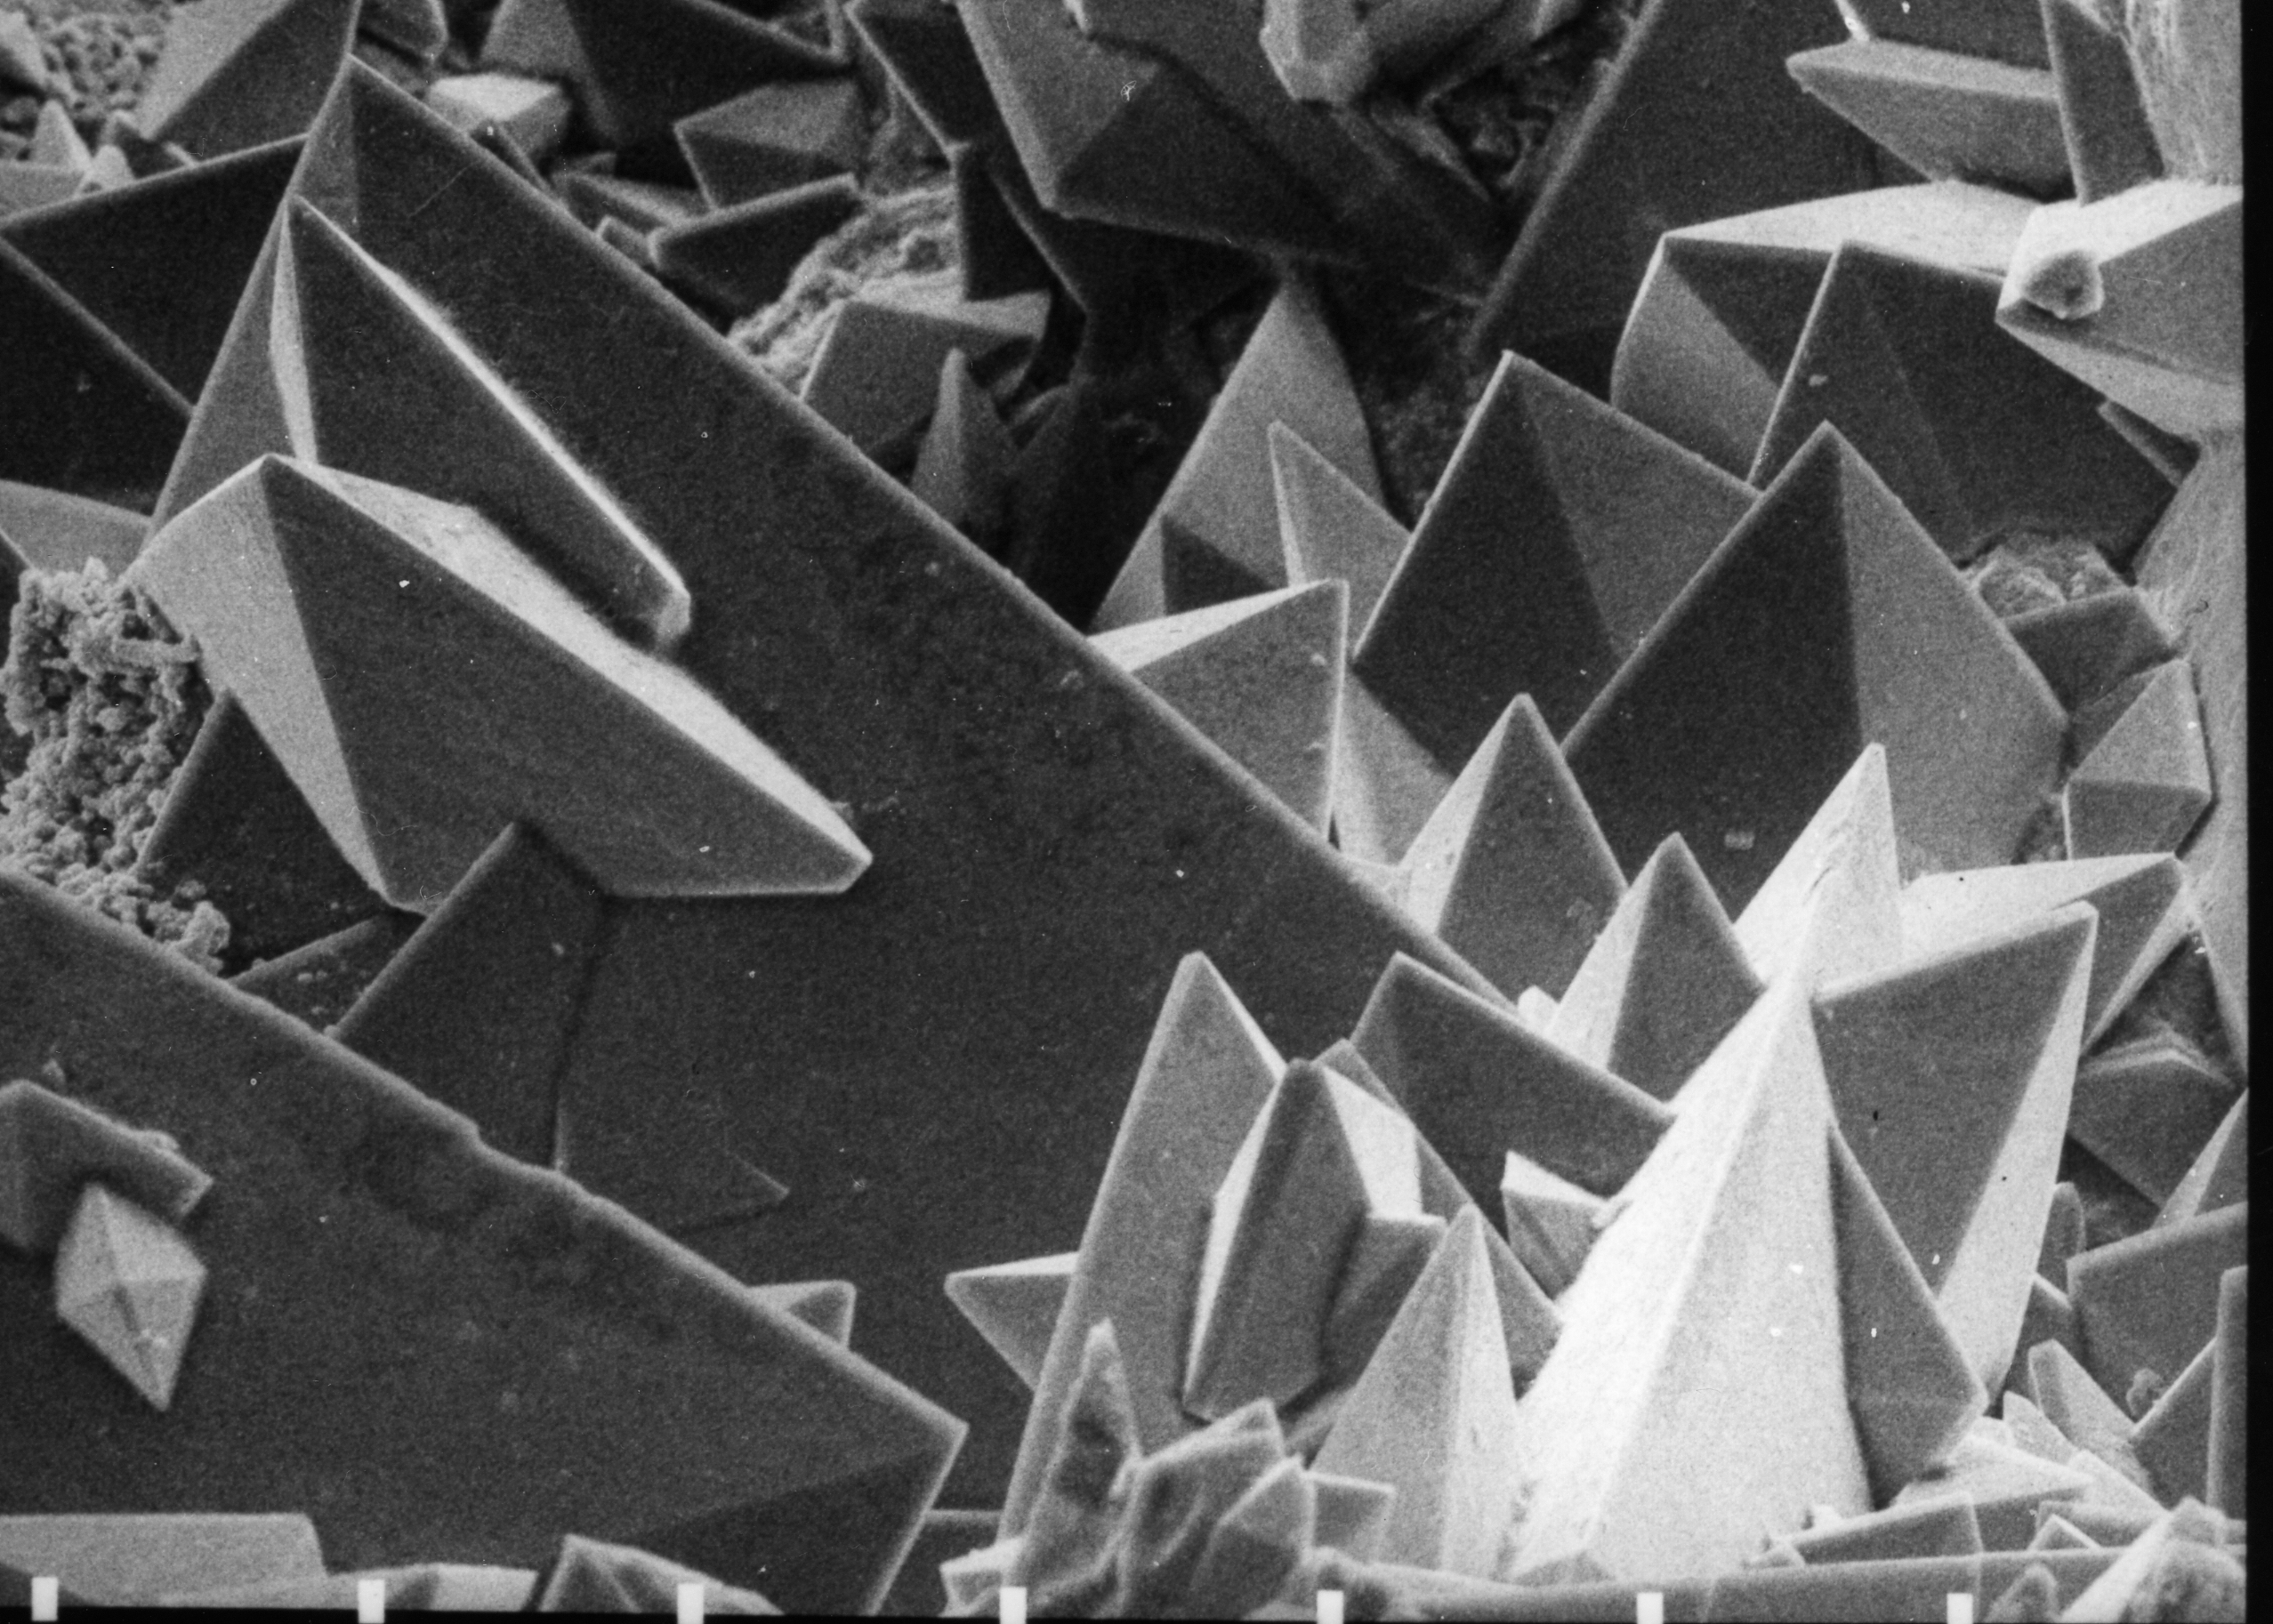 Calcium oxalate dihydrate crystals under Scanning Electron Micrograph (SEM) taken at 30 KV. Source: Wikimedia commons[8]